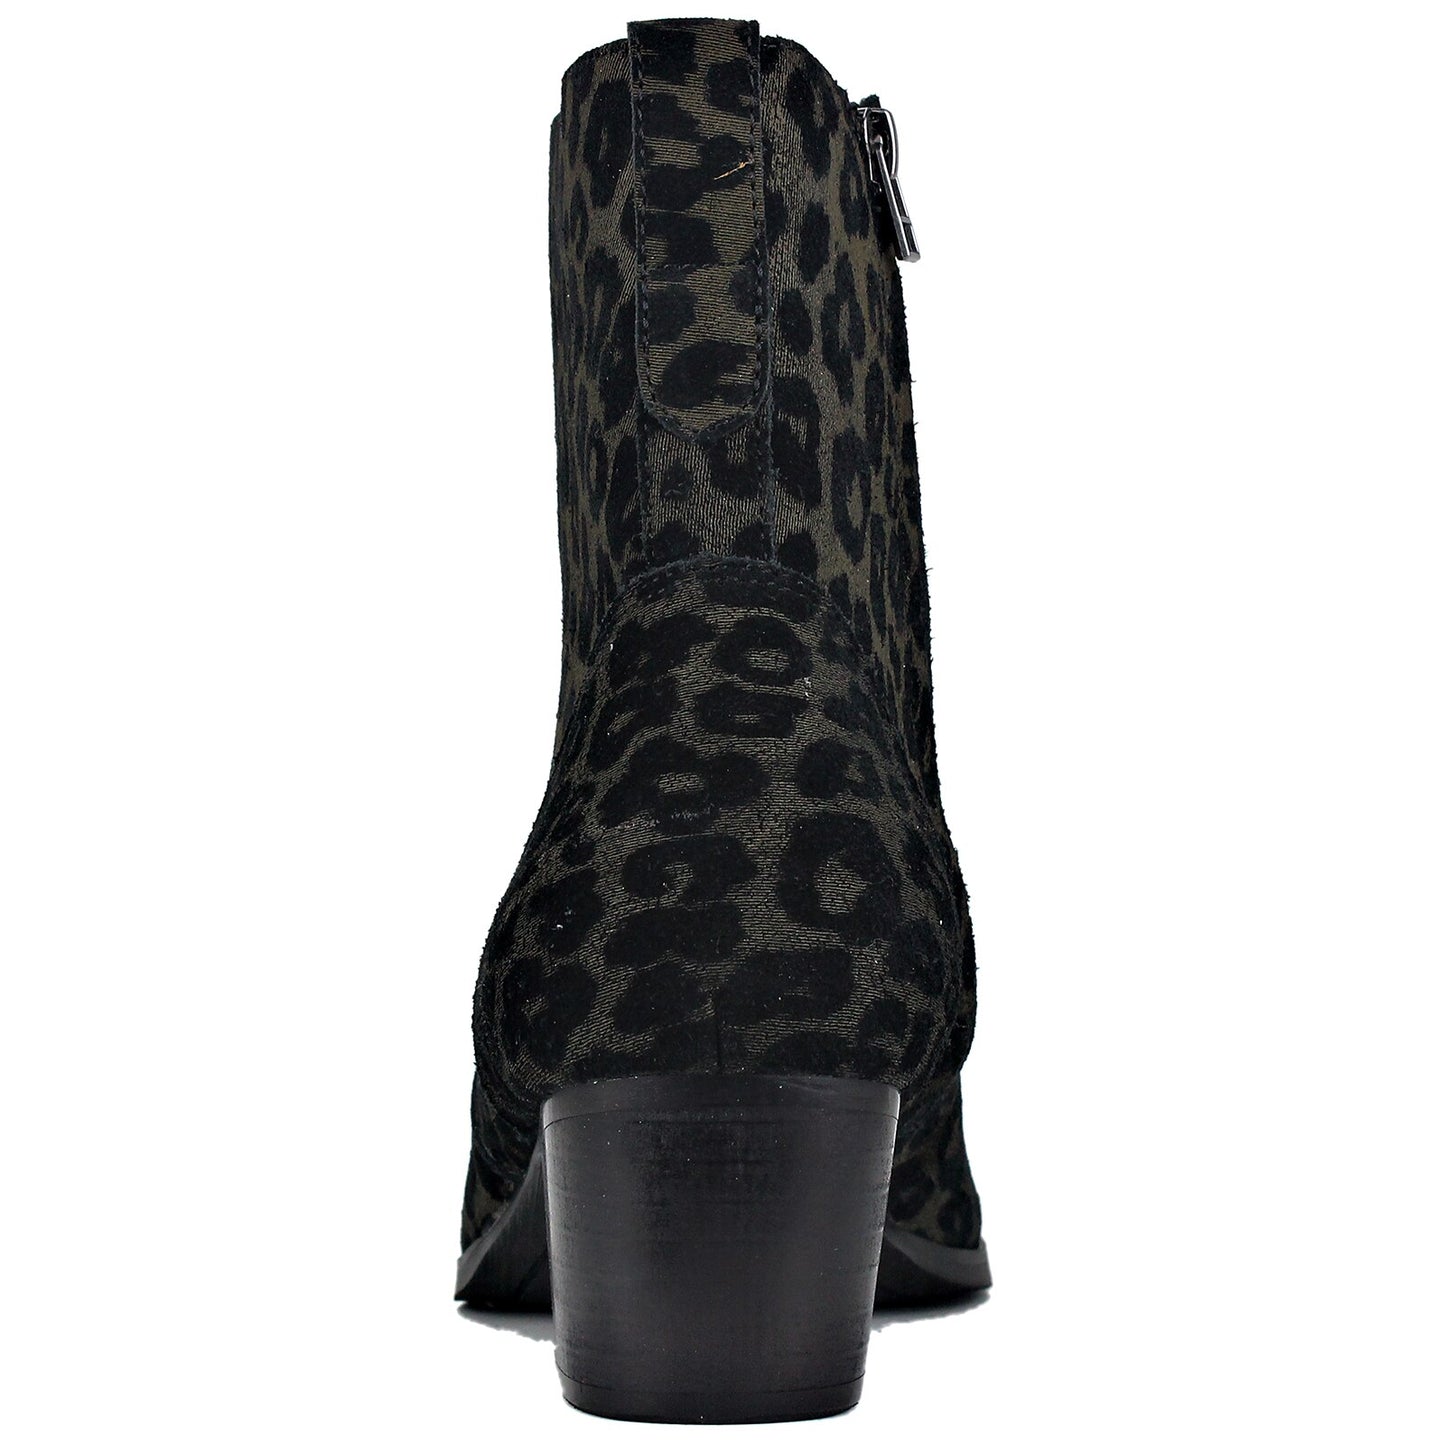 Stile Genuine Leather Leopard Boots